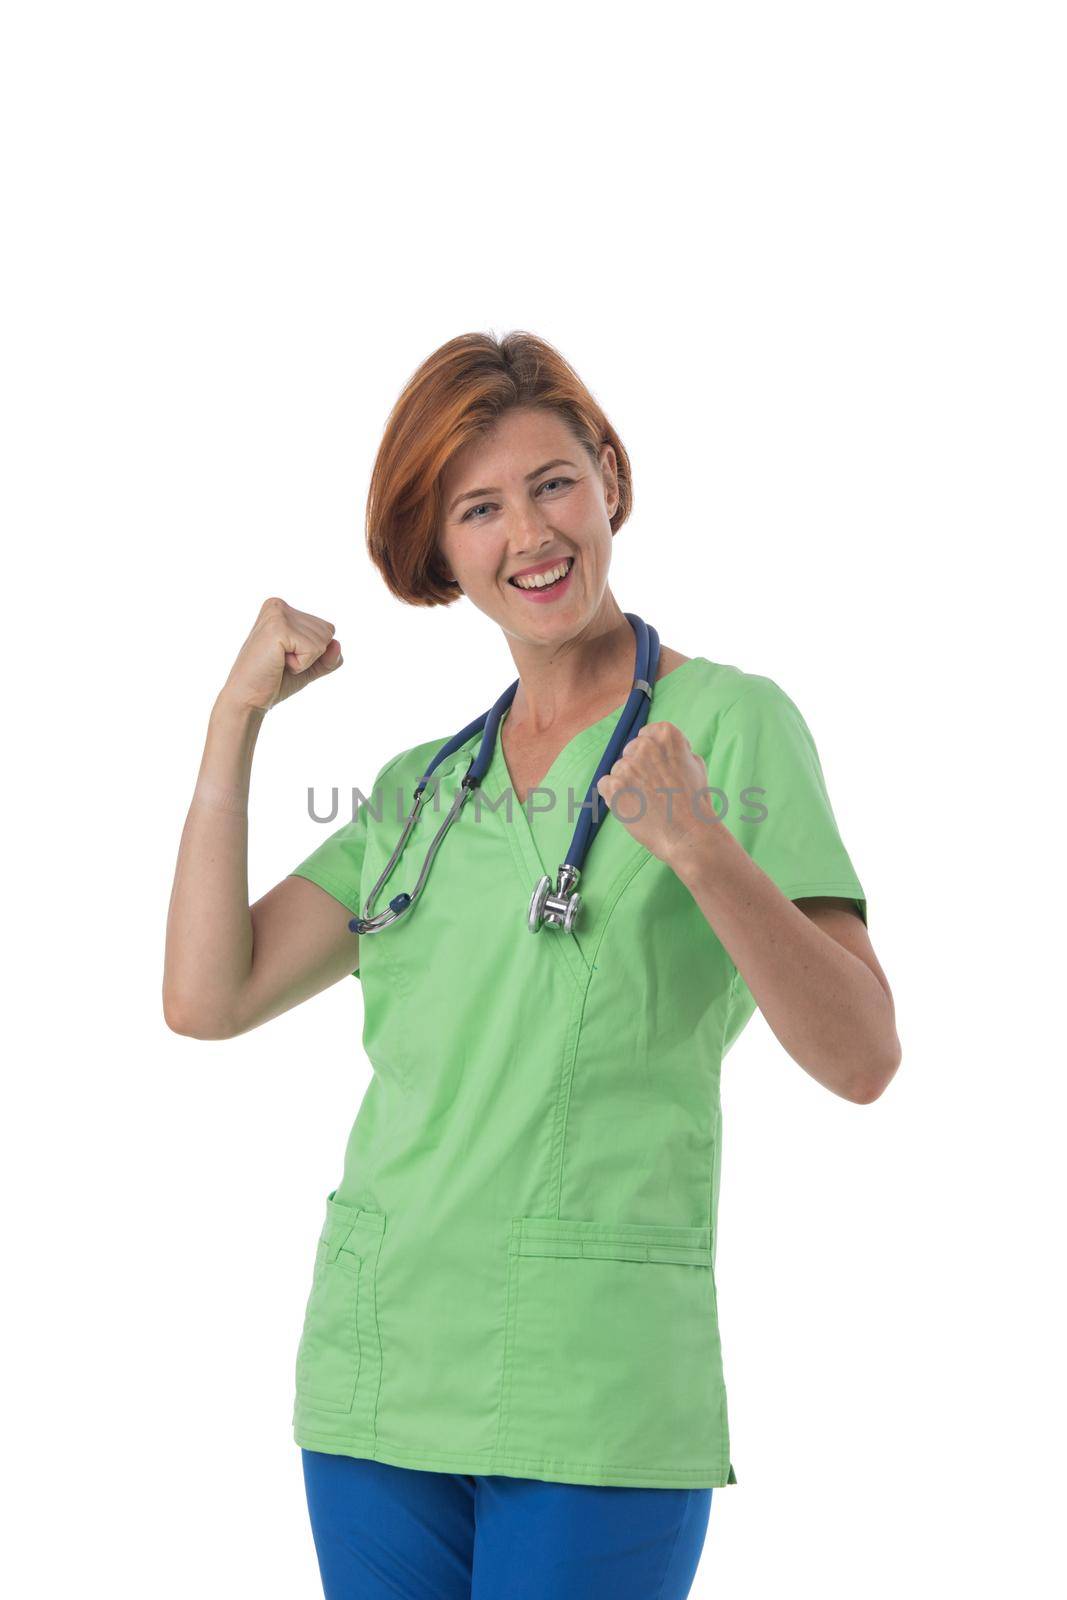 Nurse holding fisis isolated on white by ALotOfPeople